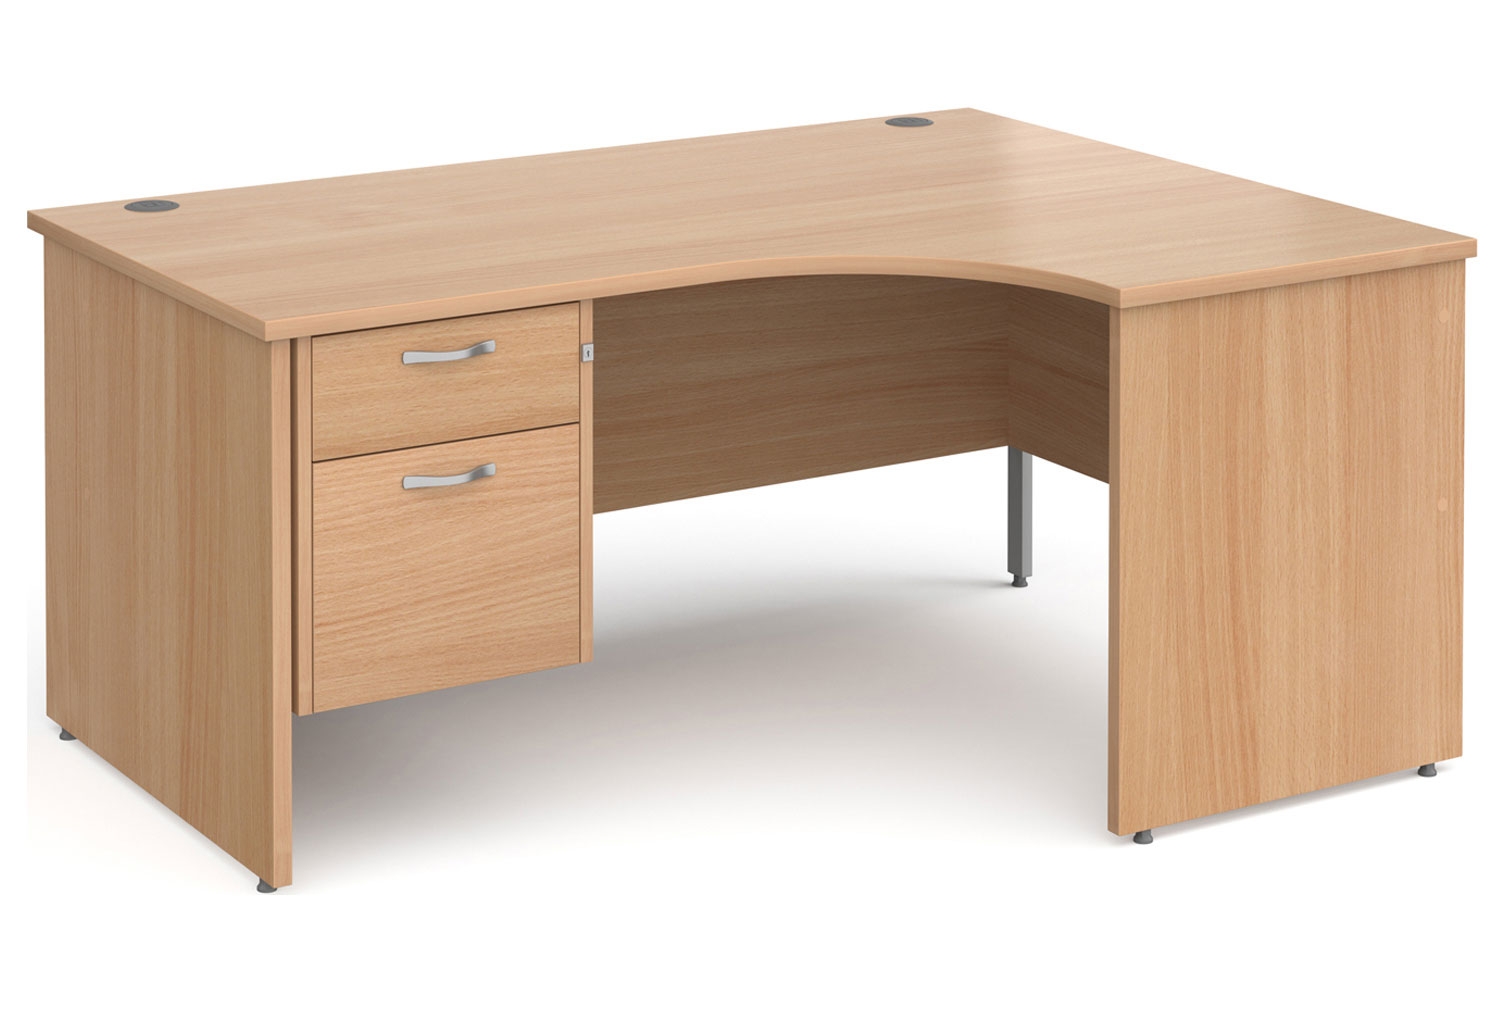 Tully Panel End Right Hand Ergonomic Office Desk 2 Drawers, 160wx120/80dx73h (cm), Beech, Express Delivery